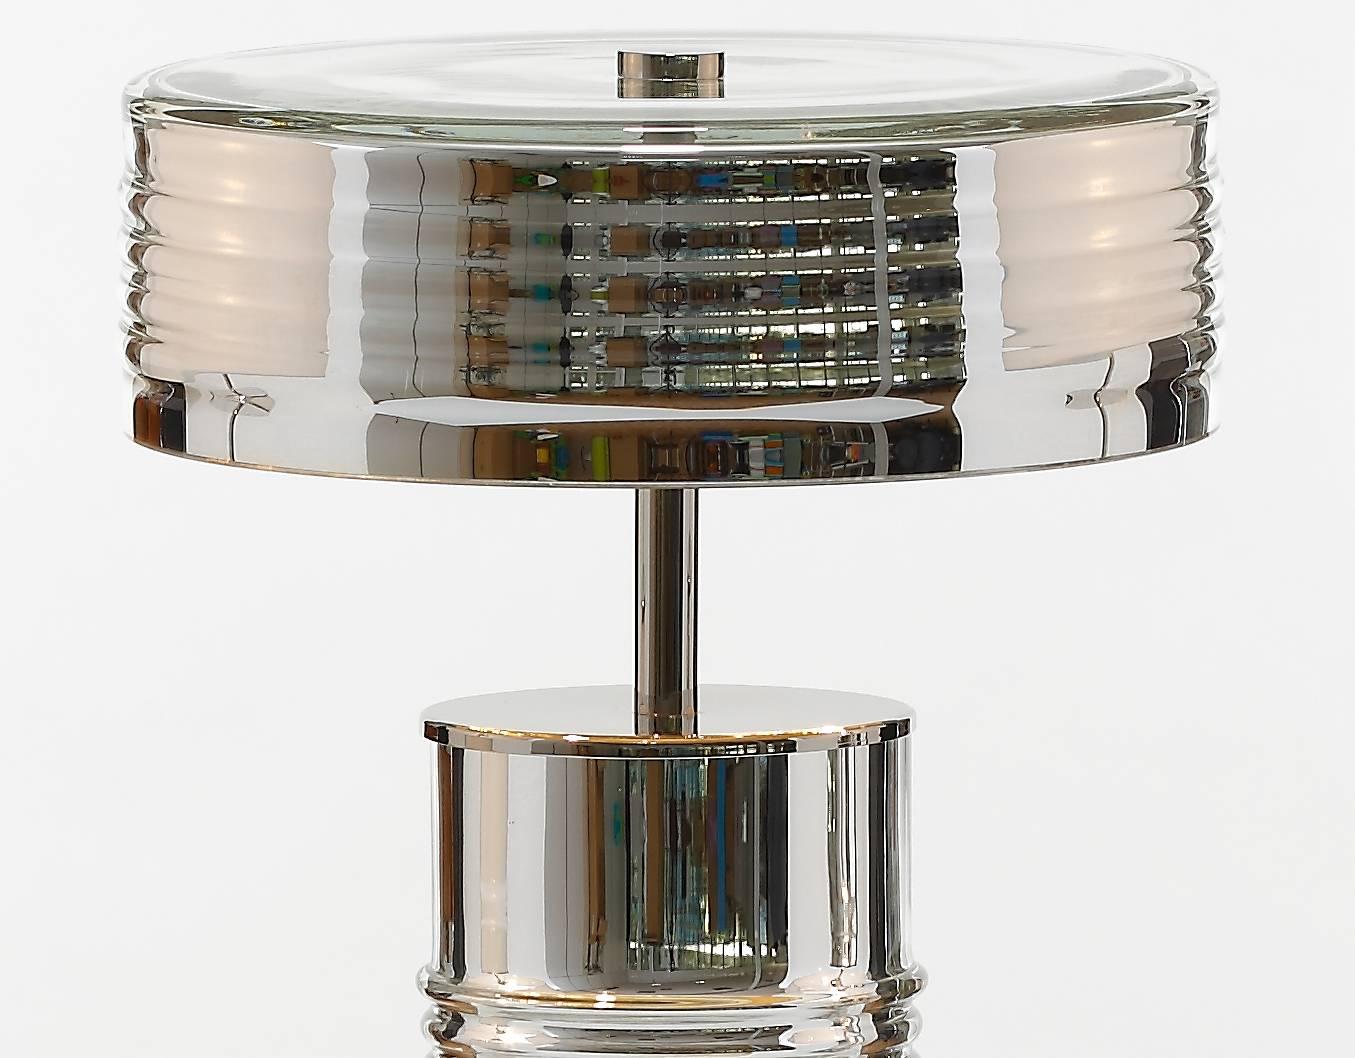 Elegant and refined lamp, designed and crafted by Portuguese artisans. A bold shape that embodies the Art-Deco era.

Measures (cm): 66 x 40
Lamps: Two lamp e14 max. 40w
Class: Class II
Material: Glass/brass
Finish: Nickel
Weight: 11